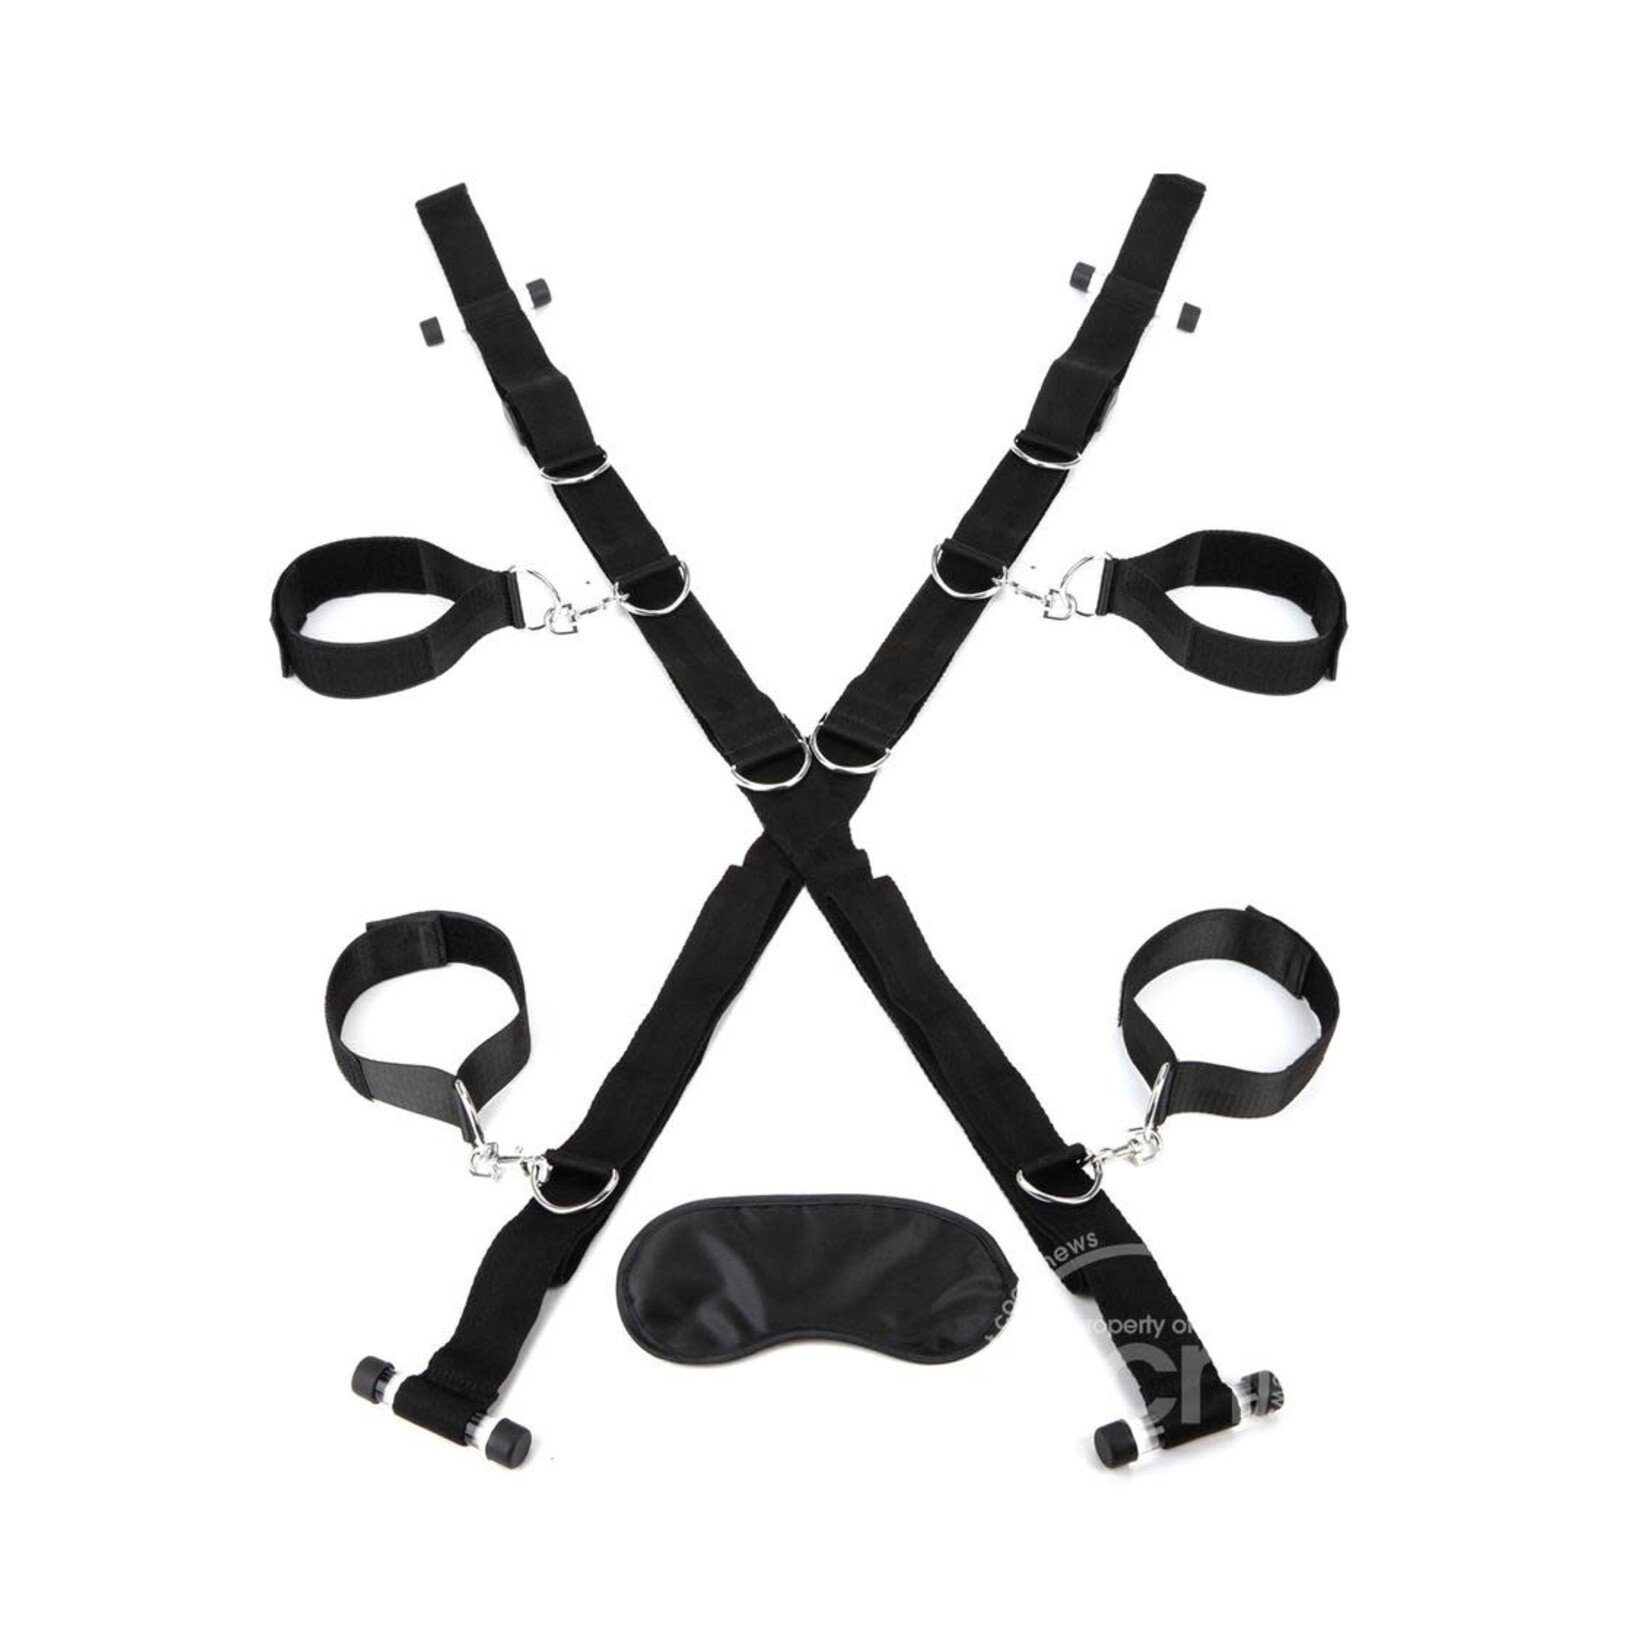 Lux Fetish Over The Door Cross With 4 Universal Soft Restraint Cuffs - Black